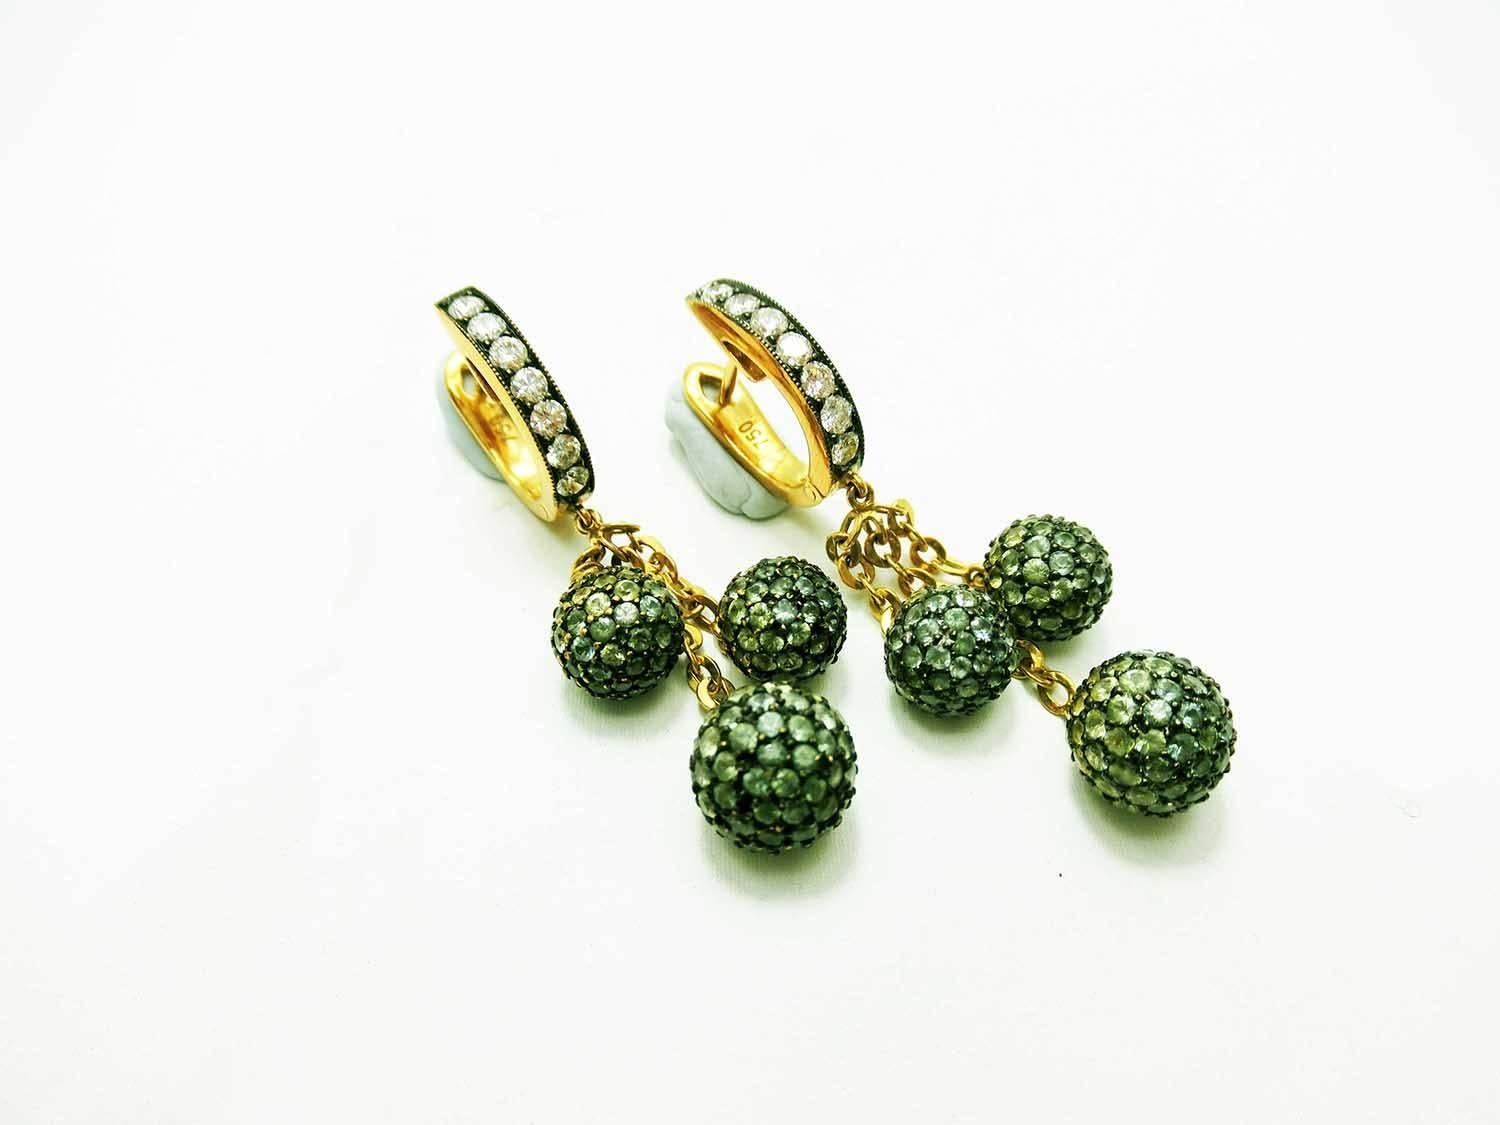 3 Balls earrings made in 18k Gold.It is a very cute dangling earrings.
You can wear for daily use.We shaded the color of Green and Yellow sapphire.
Green and Yellow sapphire 7.15 ct
Diamond 0.60 ct H VS quality